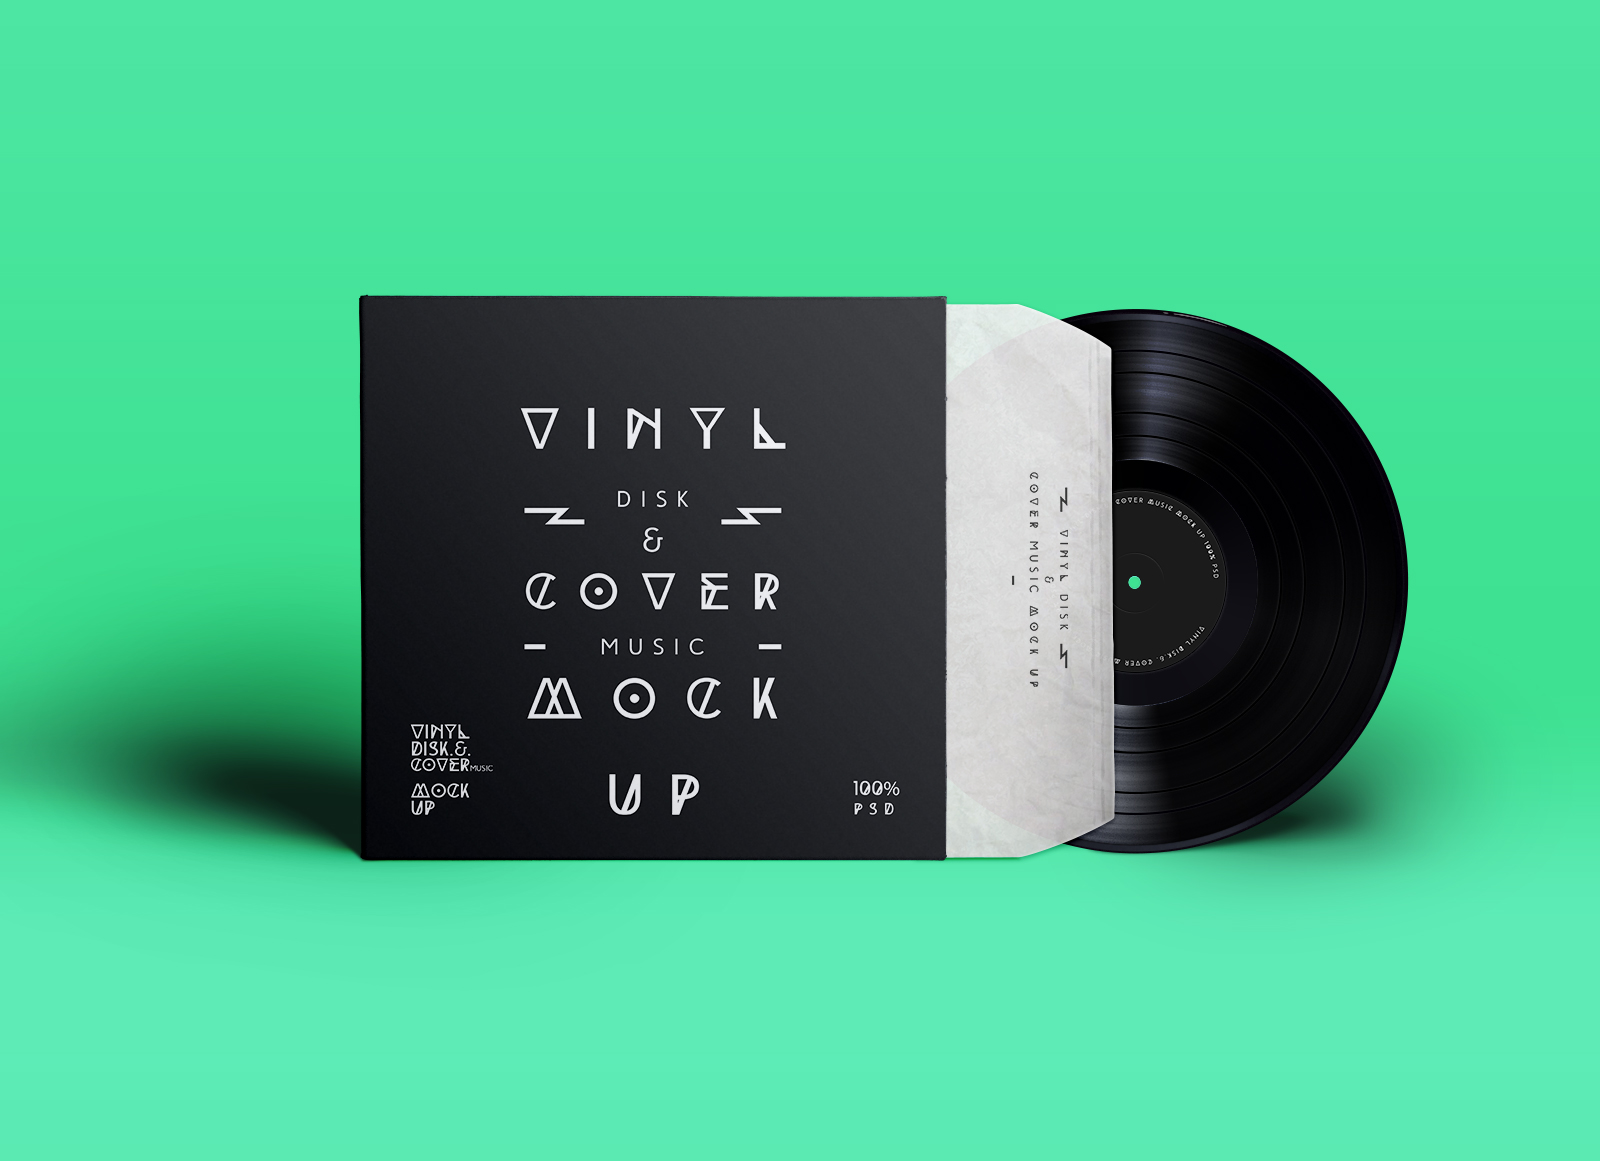 Free-Vinyl-Record-and-Cover-Packaging-Mockup-PSD